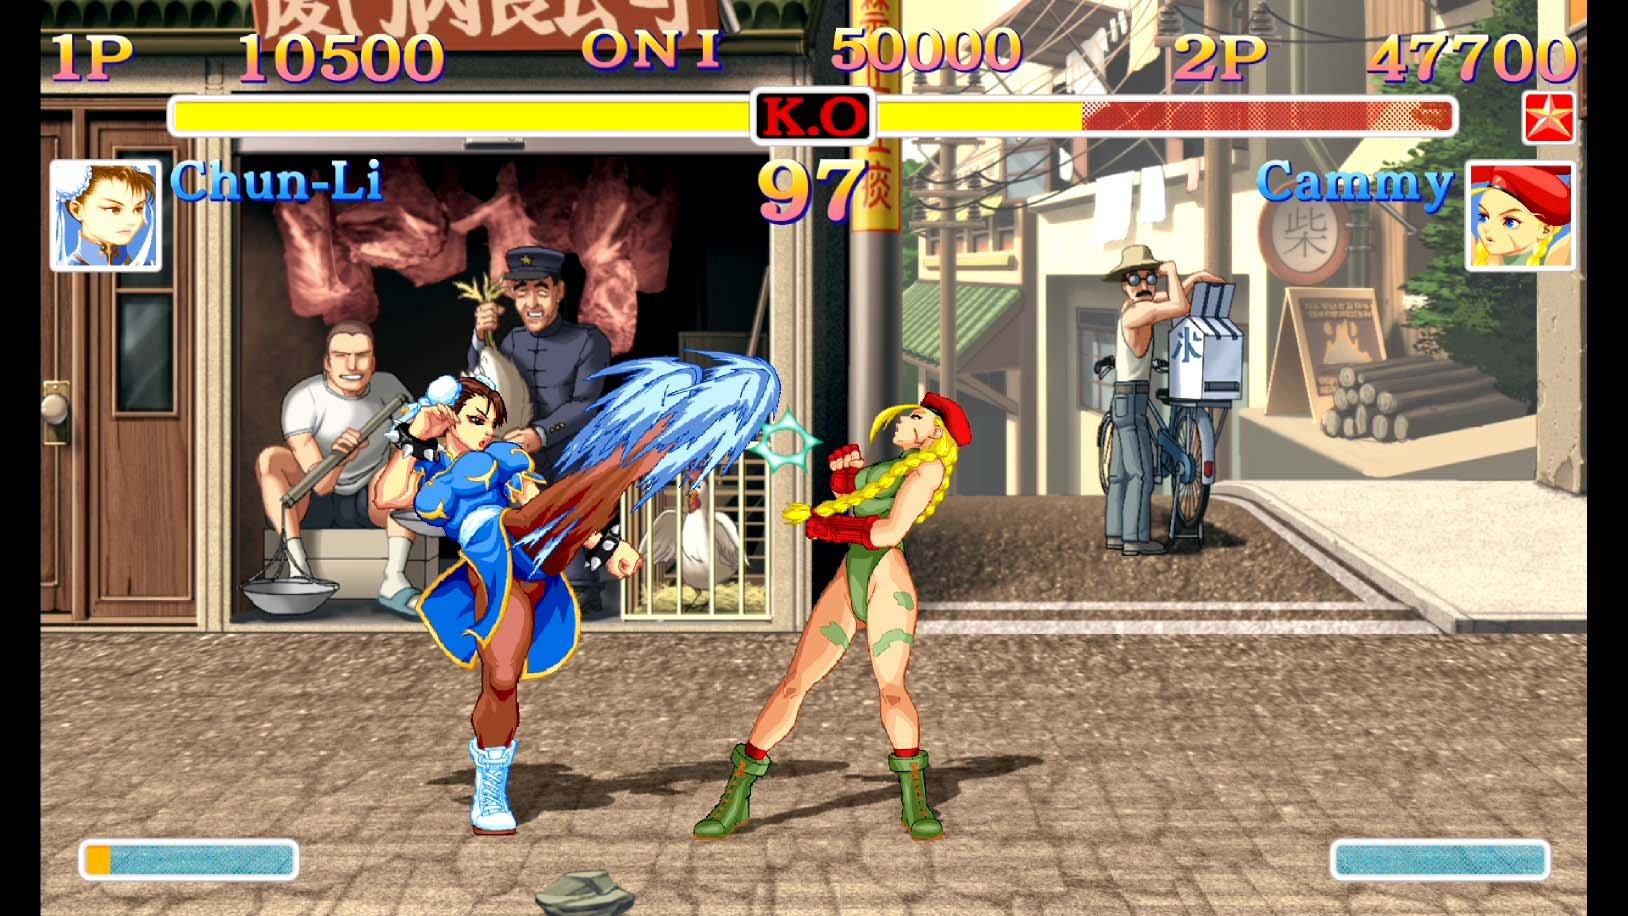 Super Street Fighter II: The New Challengers - Cammy (Capcom)